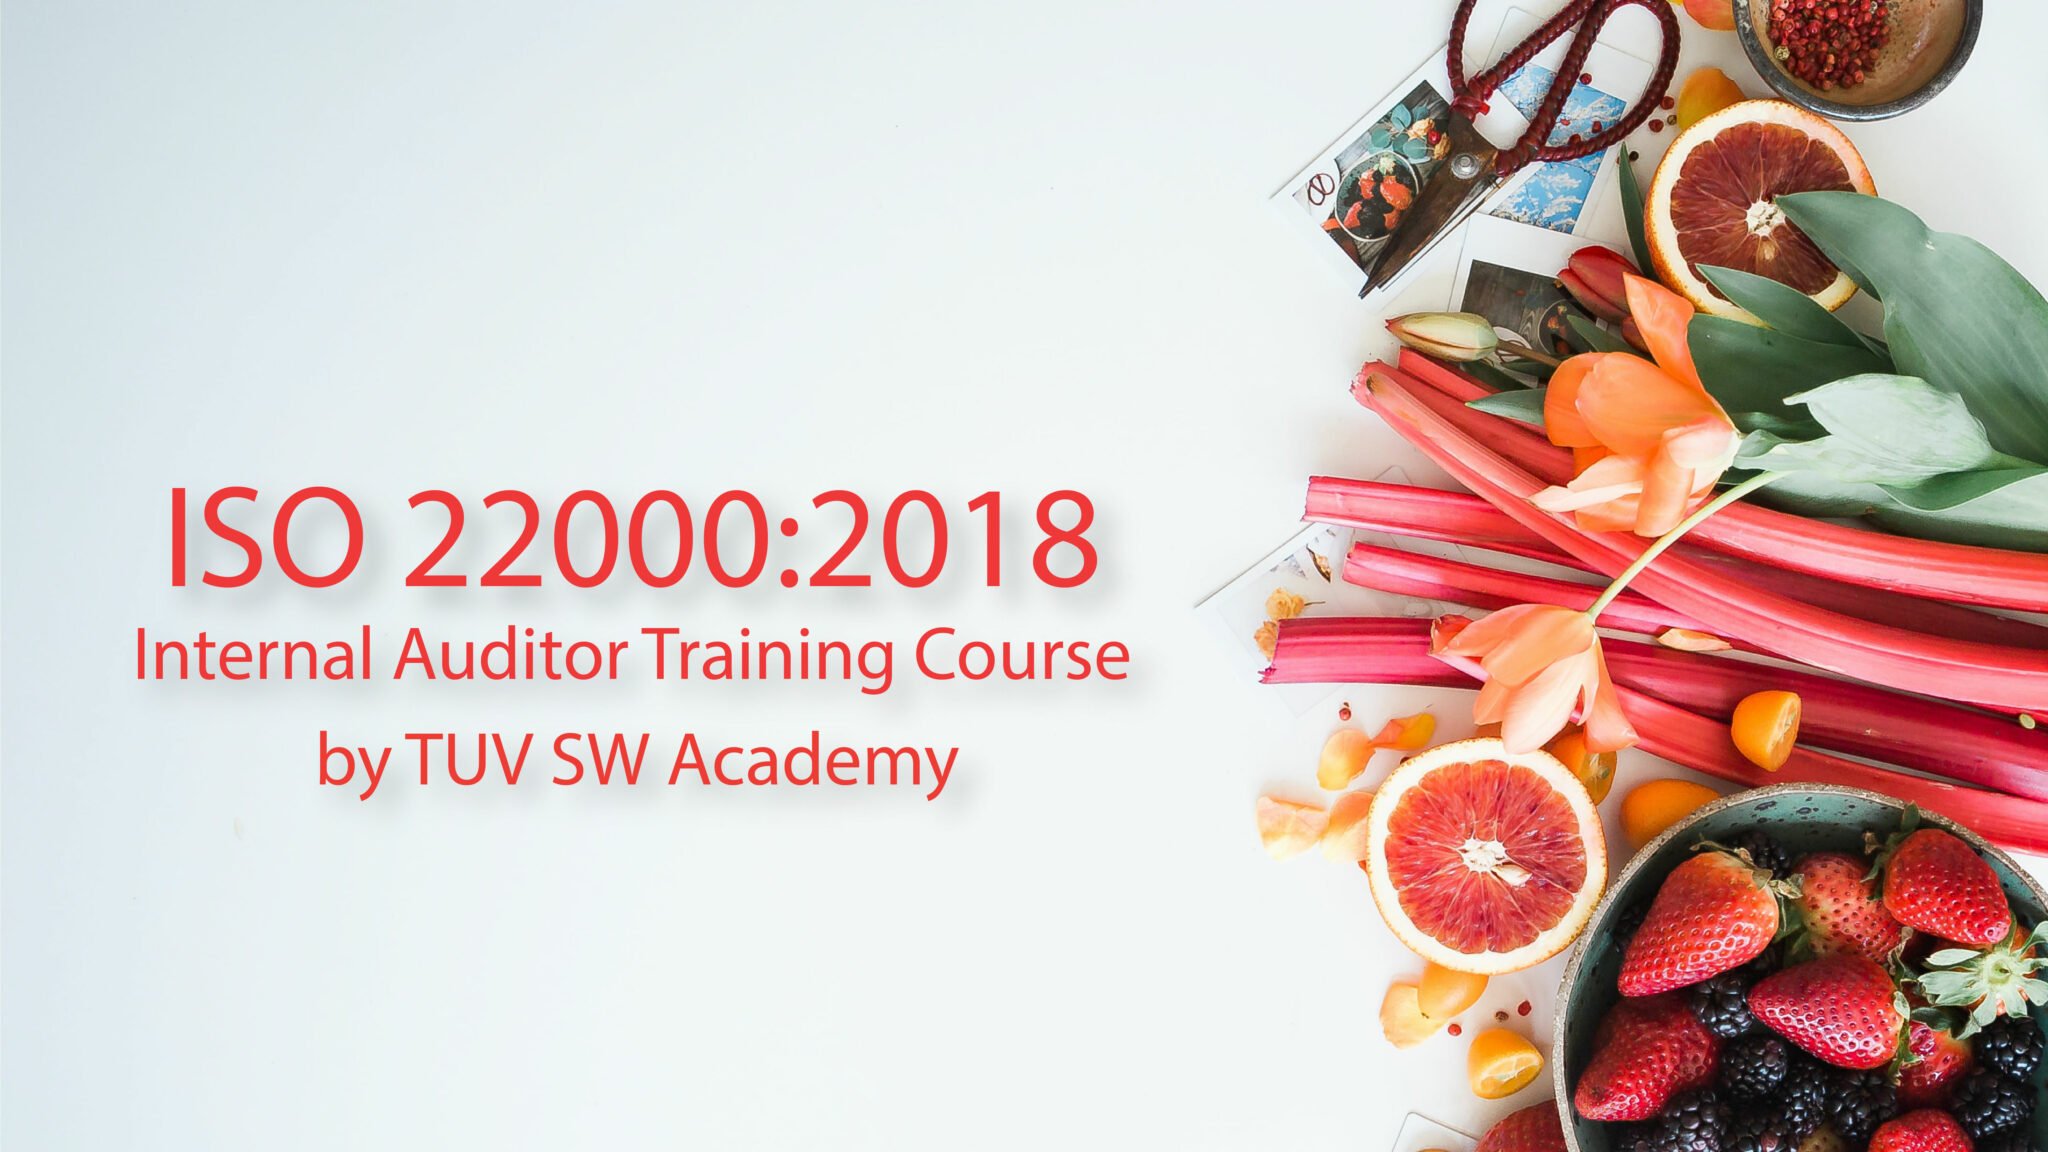 ISO 22000:2018 (FSMS) Internal Auditor Training Course